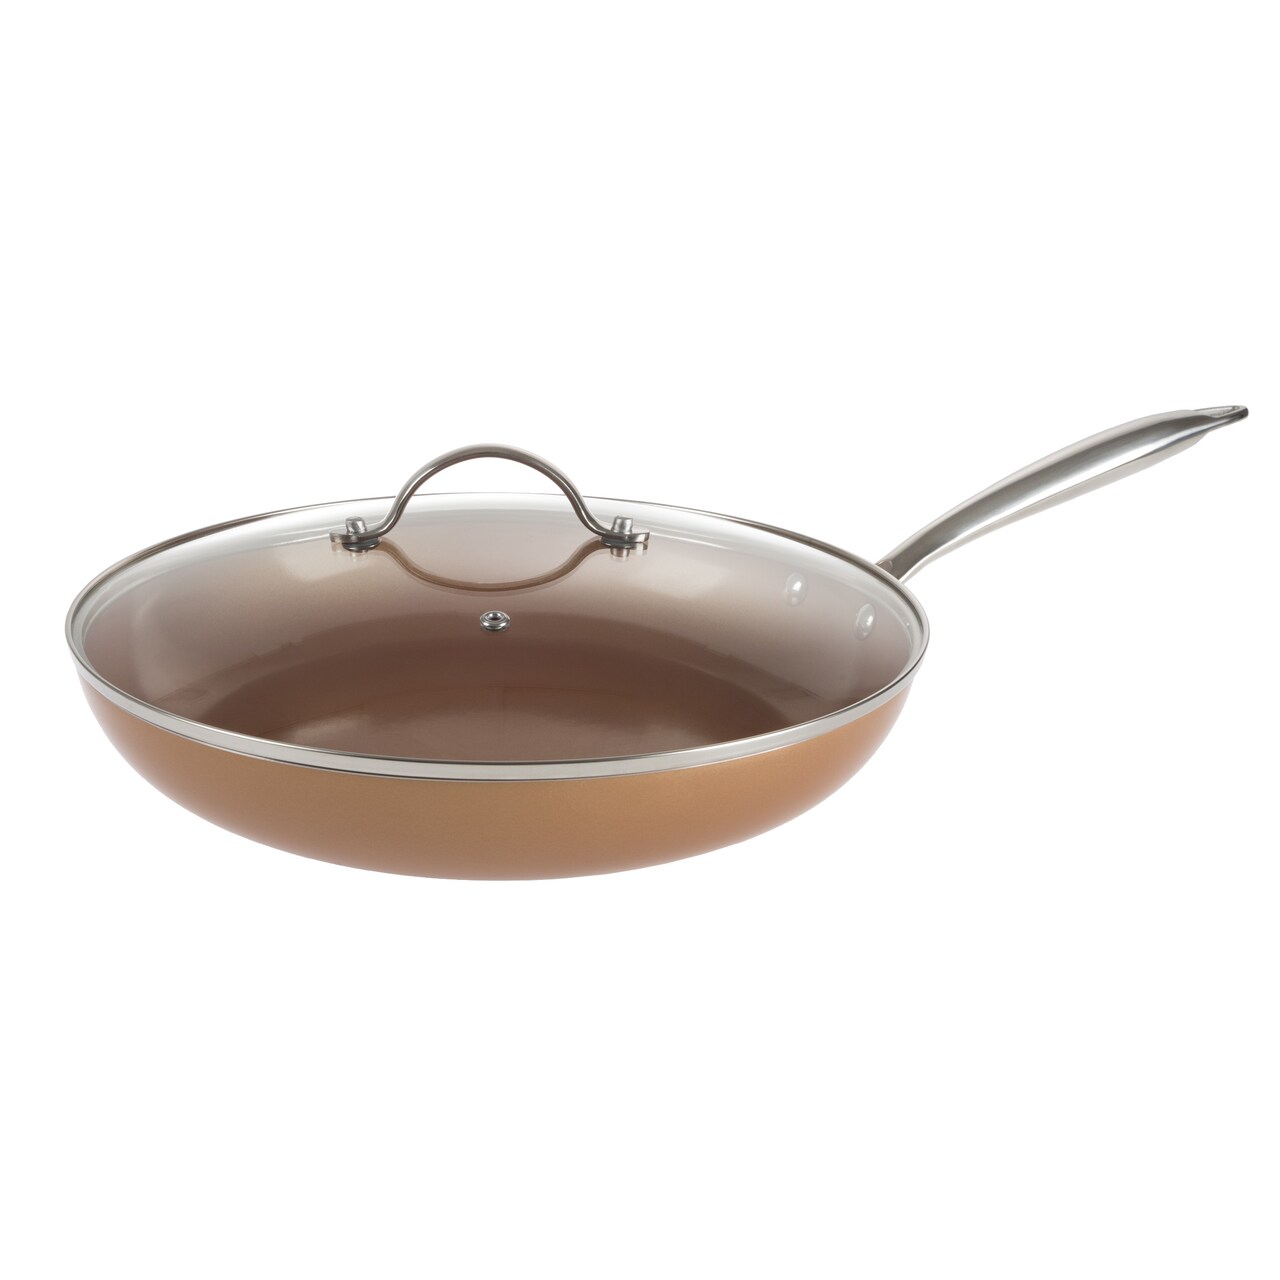 Classic Cuisine 12 Inch Frying Pan with Lid Copper Finish Induction Cooking  Oven Stove Top Safe